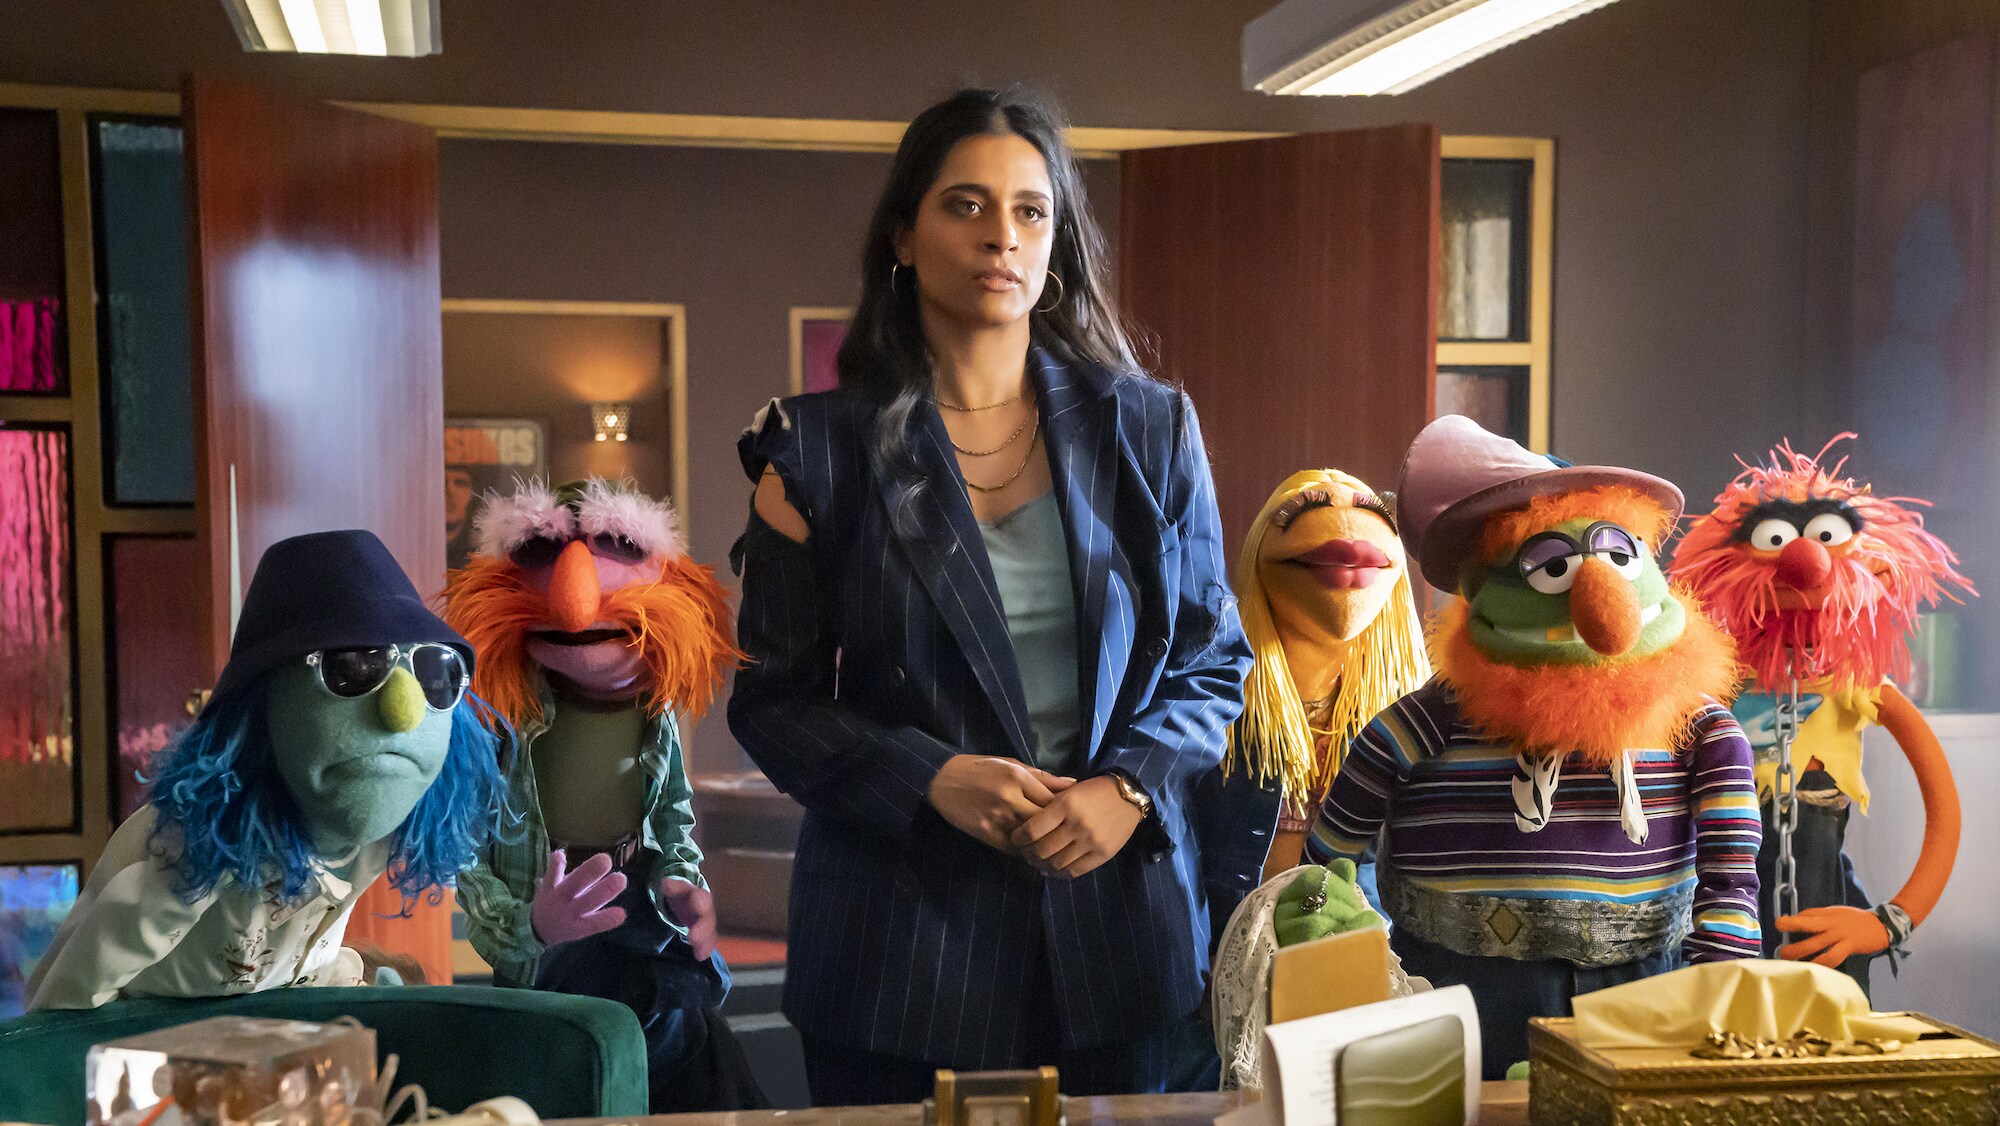 THE MUPPETS MAYHEM - “Track 1: Can You Picture That?” (Disney/Mitch Haaseth) ZOOT, FLOYD PEPPER, LILLY SINGH, JANICE, DR. TEETH, ANIMAL